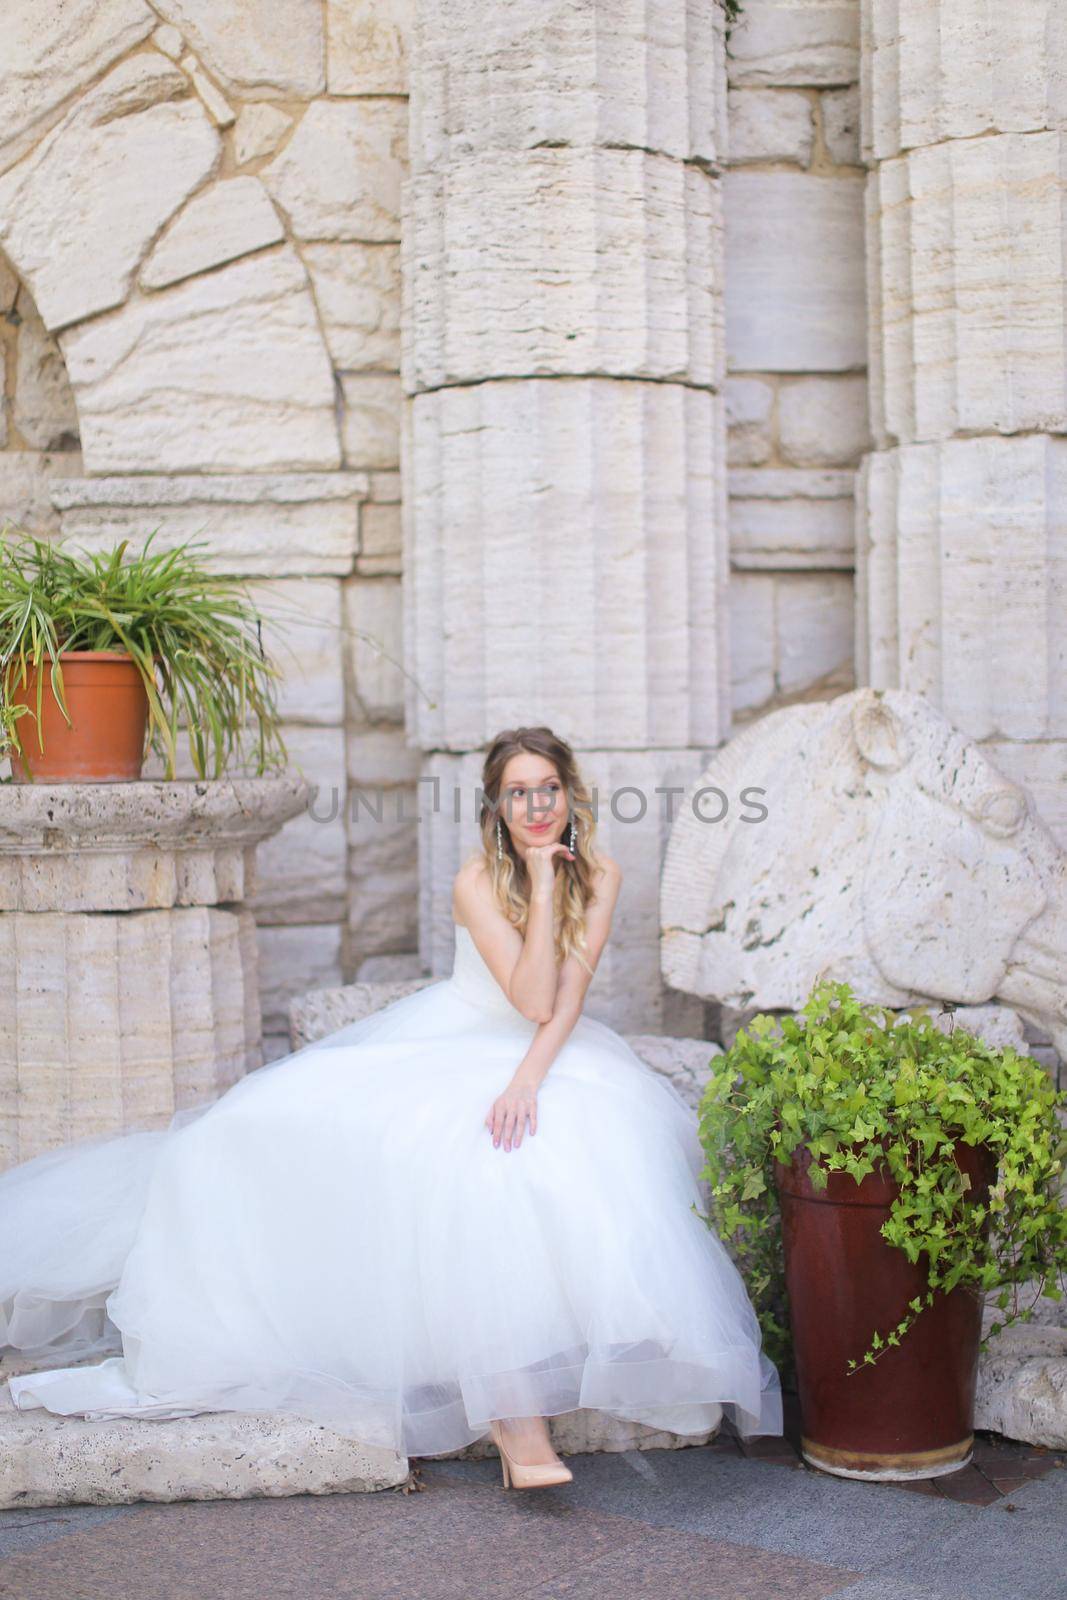 Caucasian european fiancee sitting near ancient columns and wearing white dress. Concept of bridal photo session and wedding.